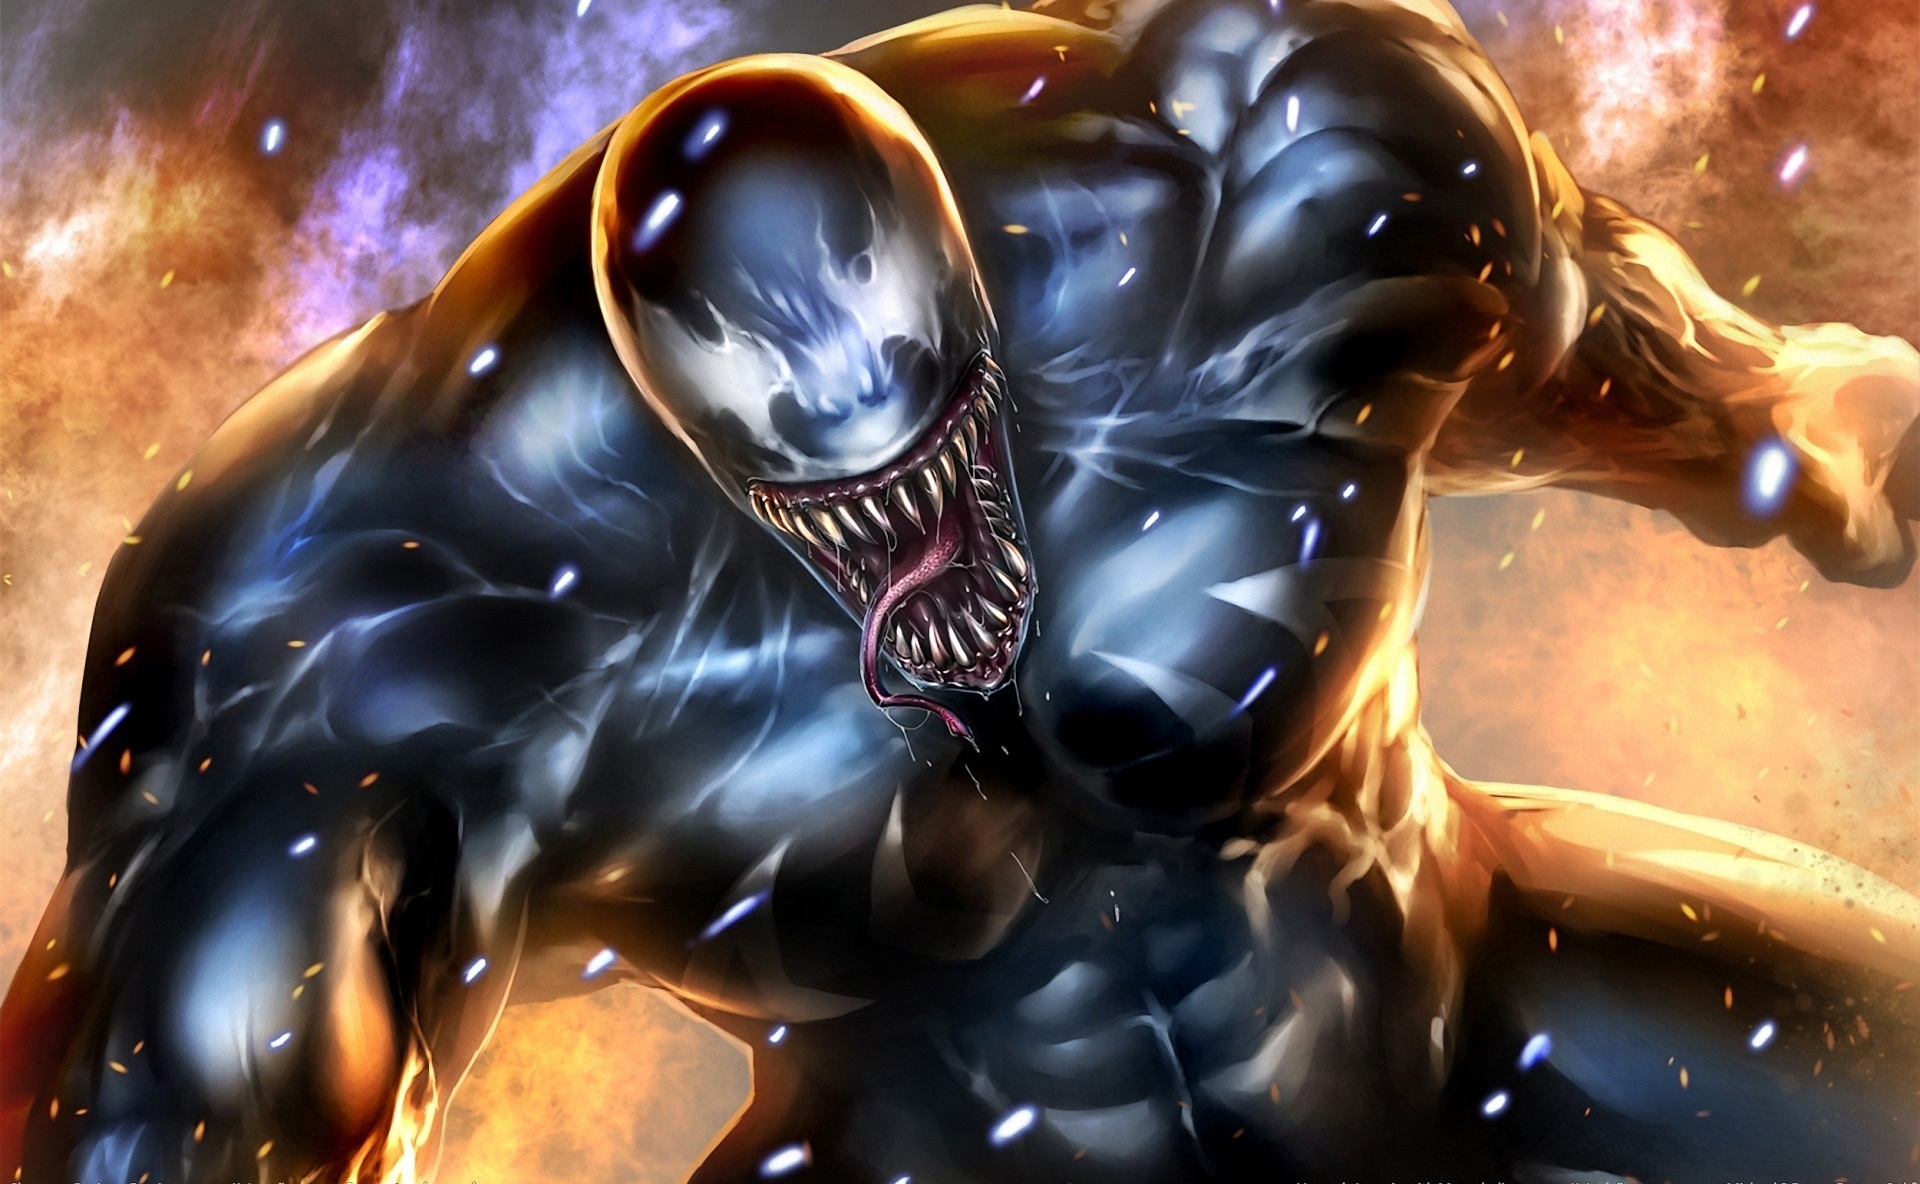 Comic book character Venom, an iconic symbol of darkness & aggression. A brooding figure surrounded by mystery & power.